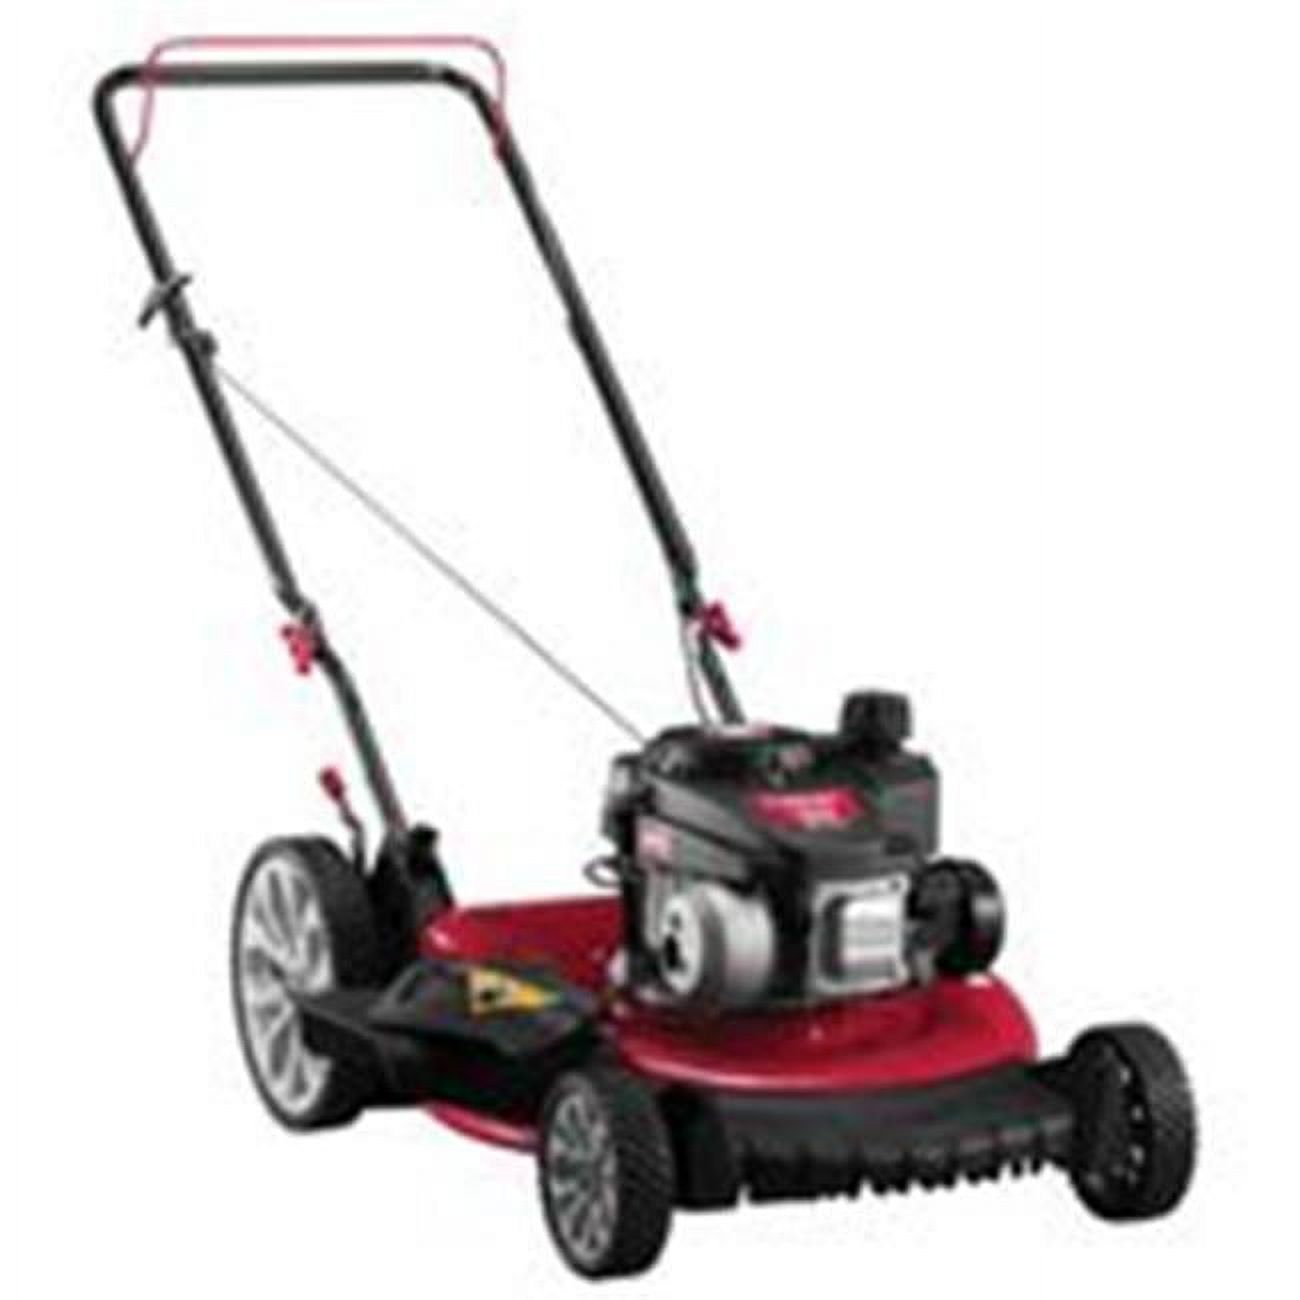 MTD Products 4686473 21 in. 2 in 1 159CC Lawn Push Mower - image 1 of 2